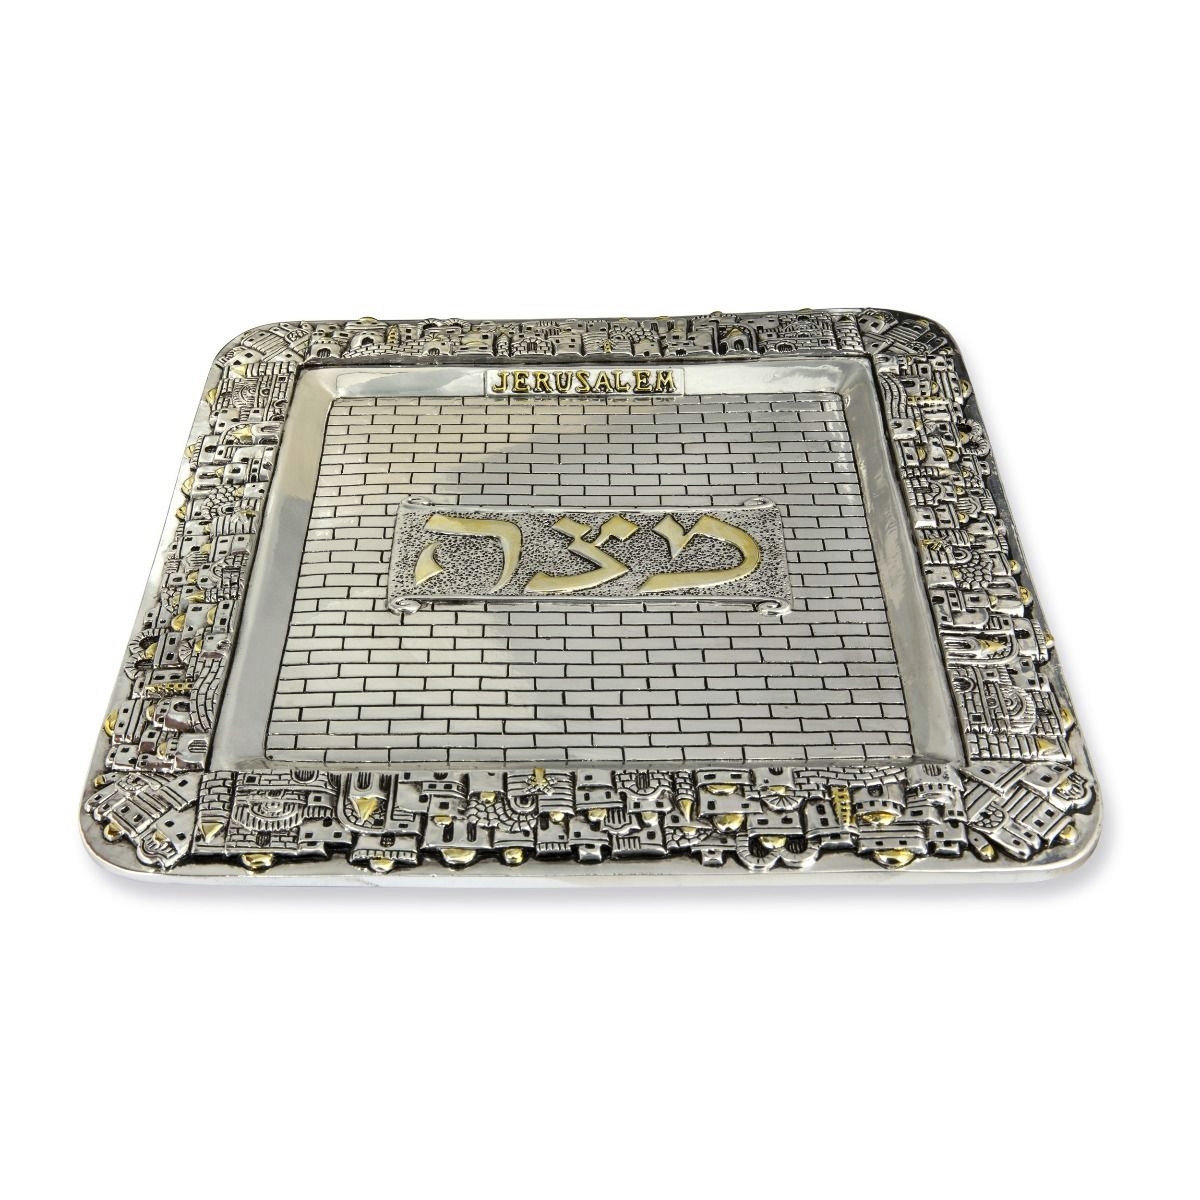 Deluxe Silver-Plated Matzah Tray With Jerusalem Design - 1